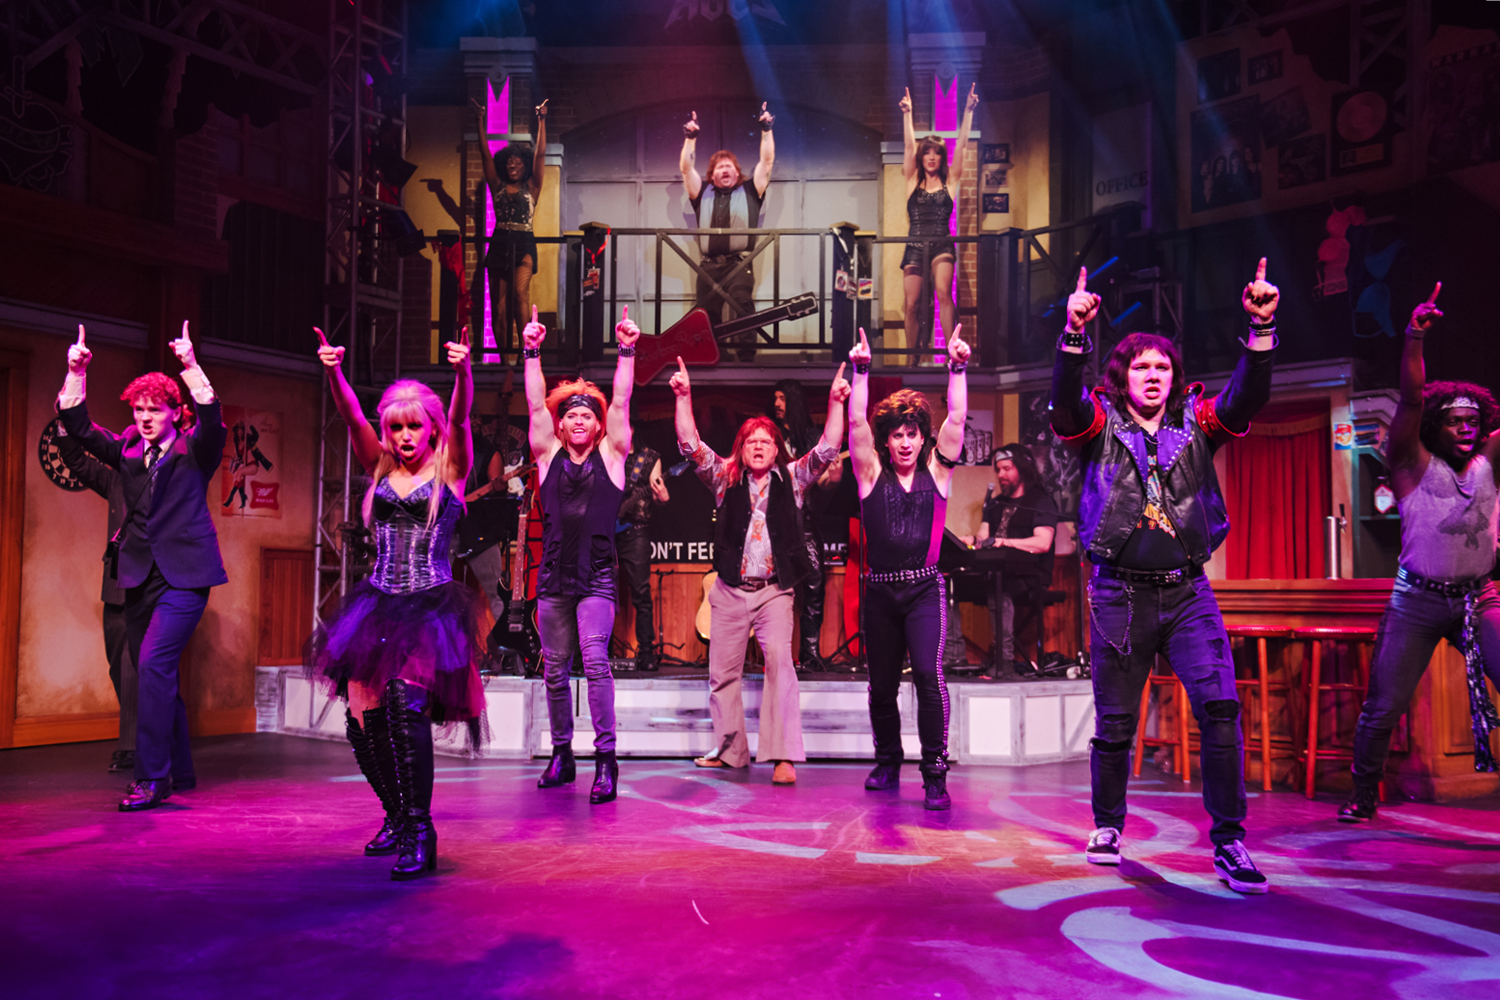 Production photo of Rock of Ages, showing the entire company dancing on stage with dramatic lighting.